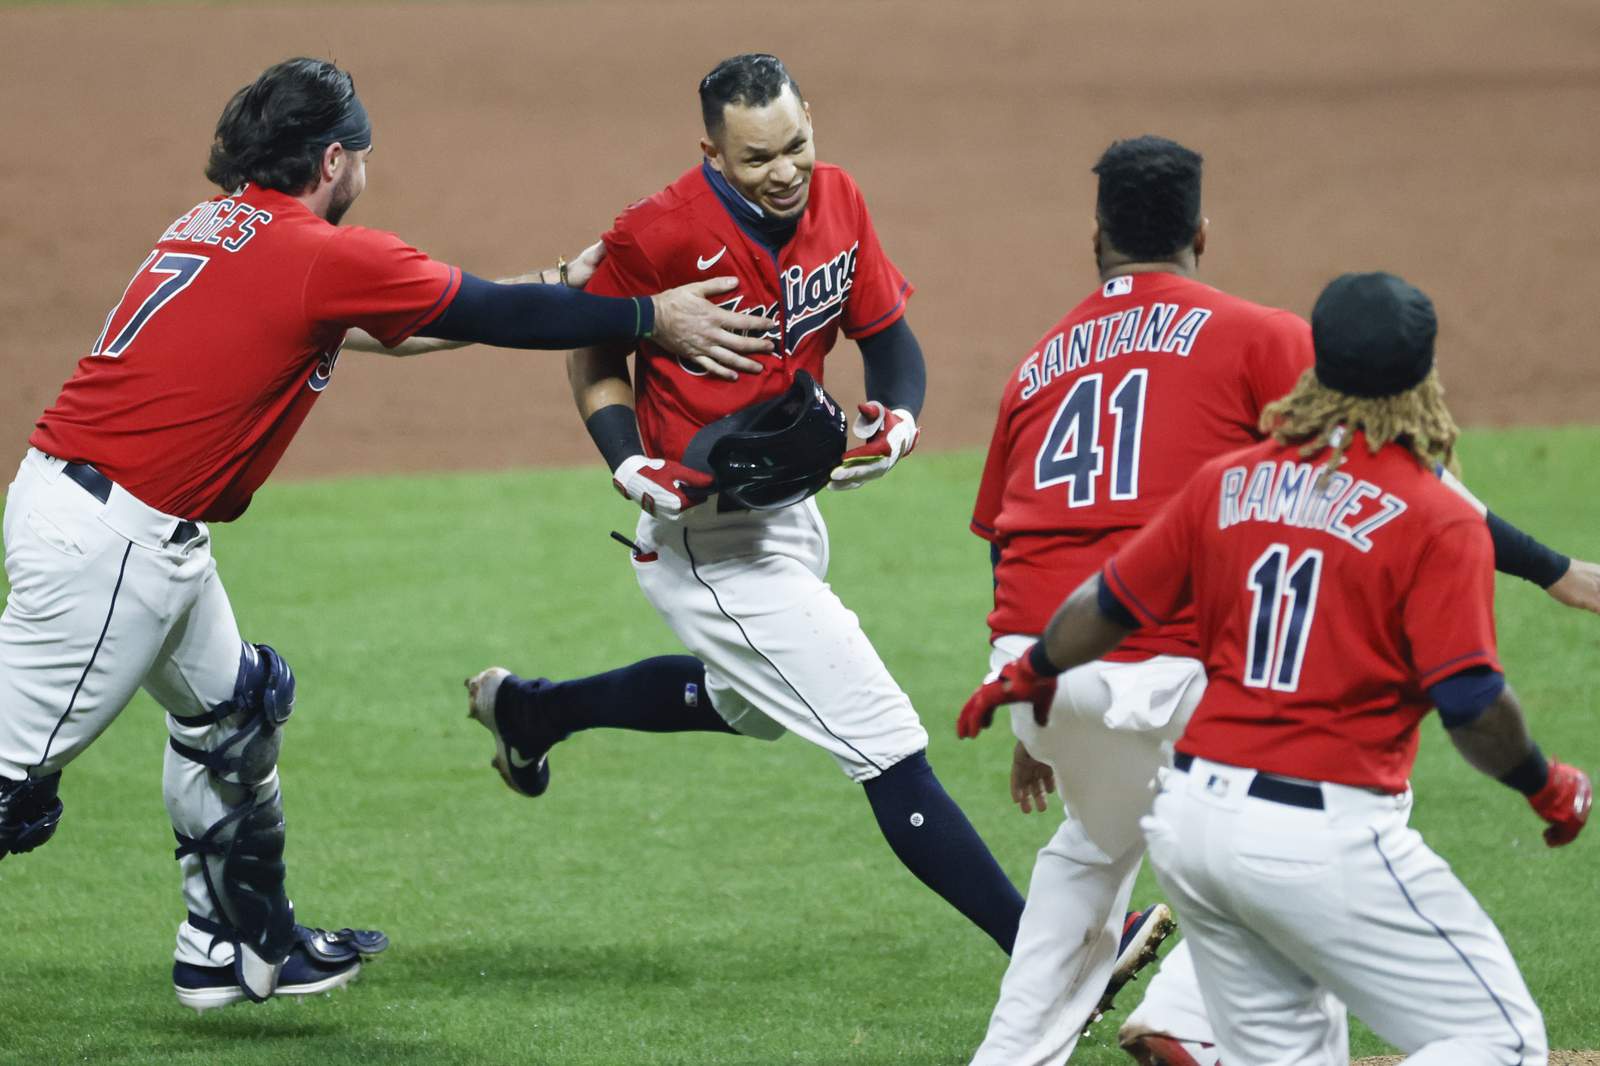 Indians rally for 4-3 win, keep AL Central title hopes alive